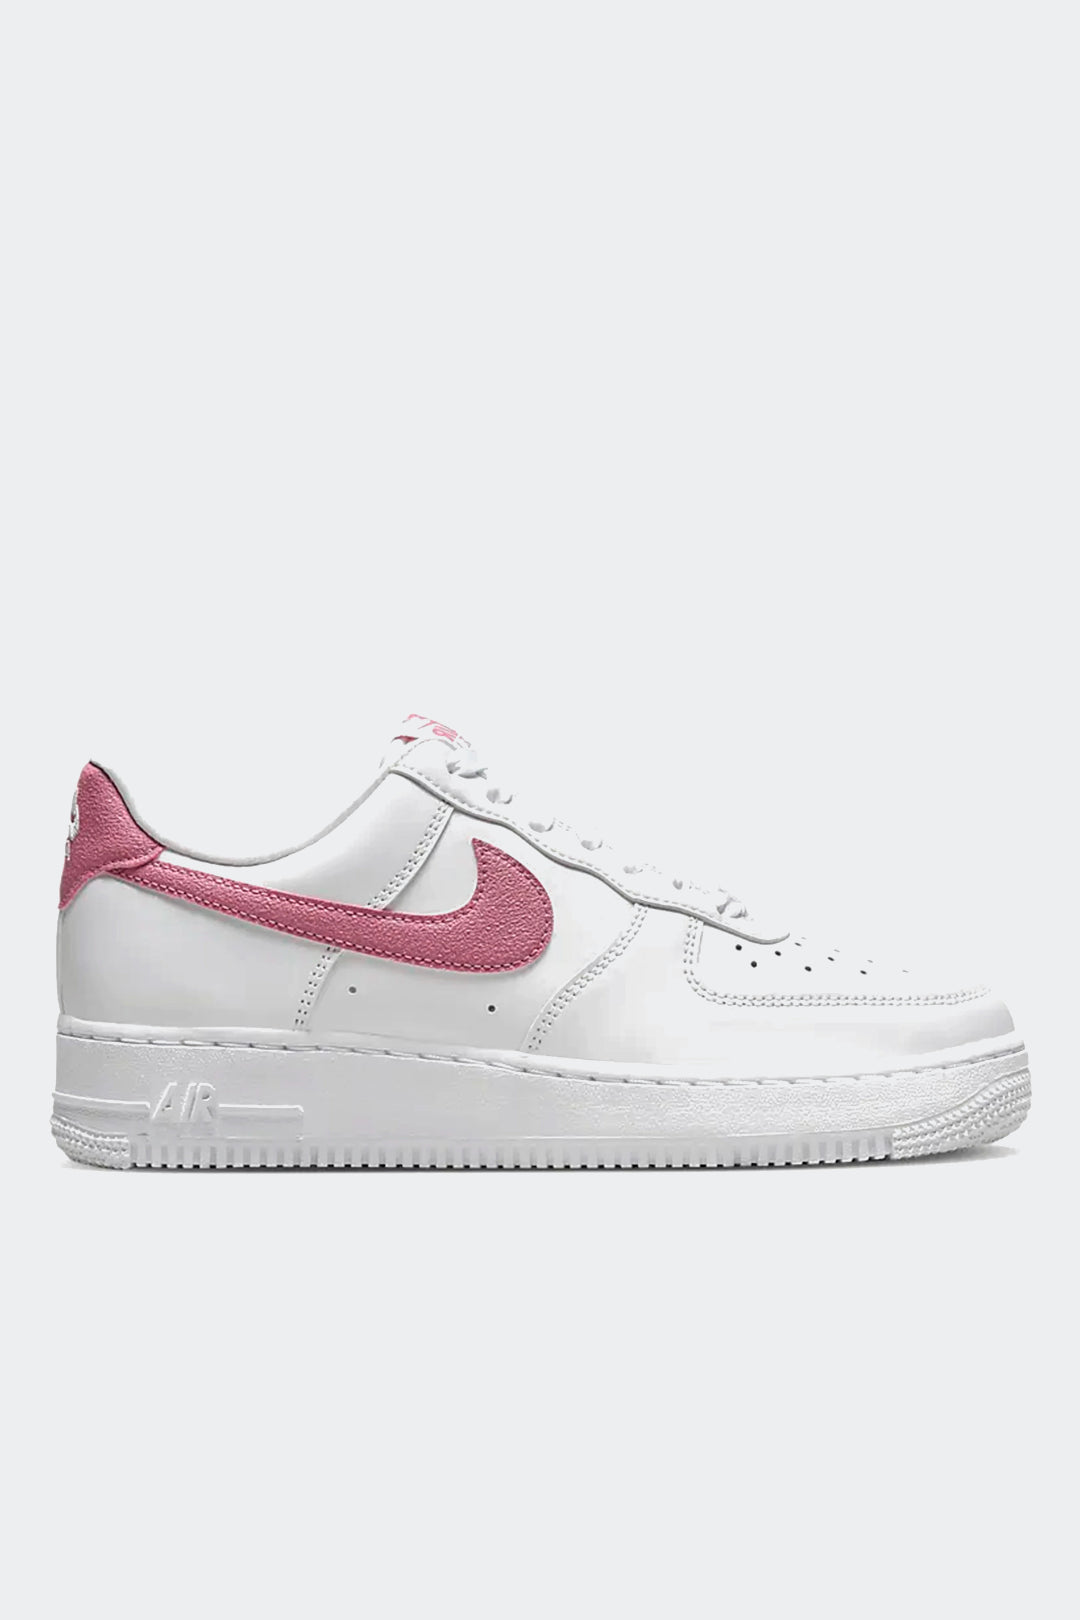 NIKE AIR FORCE 1 LOW '07 ESS "DESERT BERRY"- MUJER - HYPE